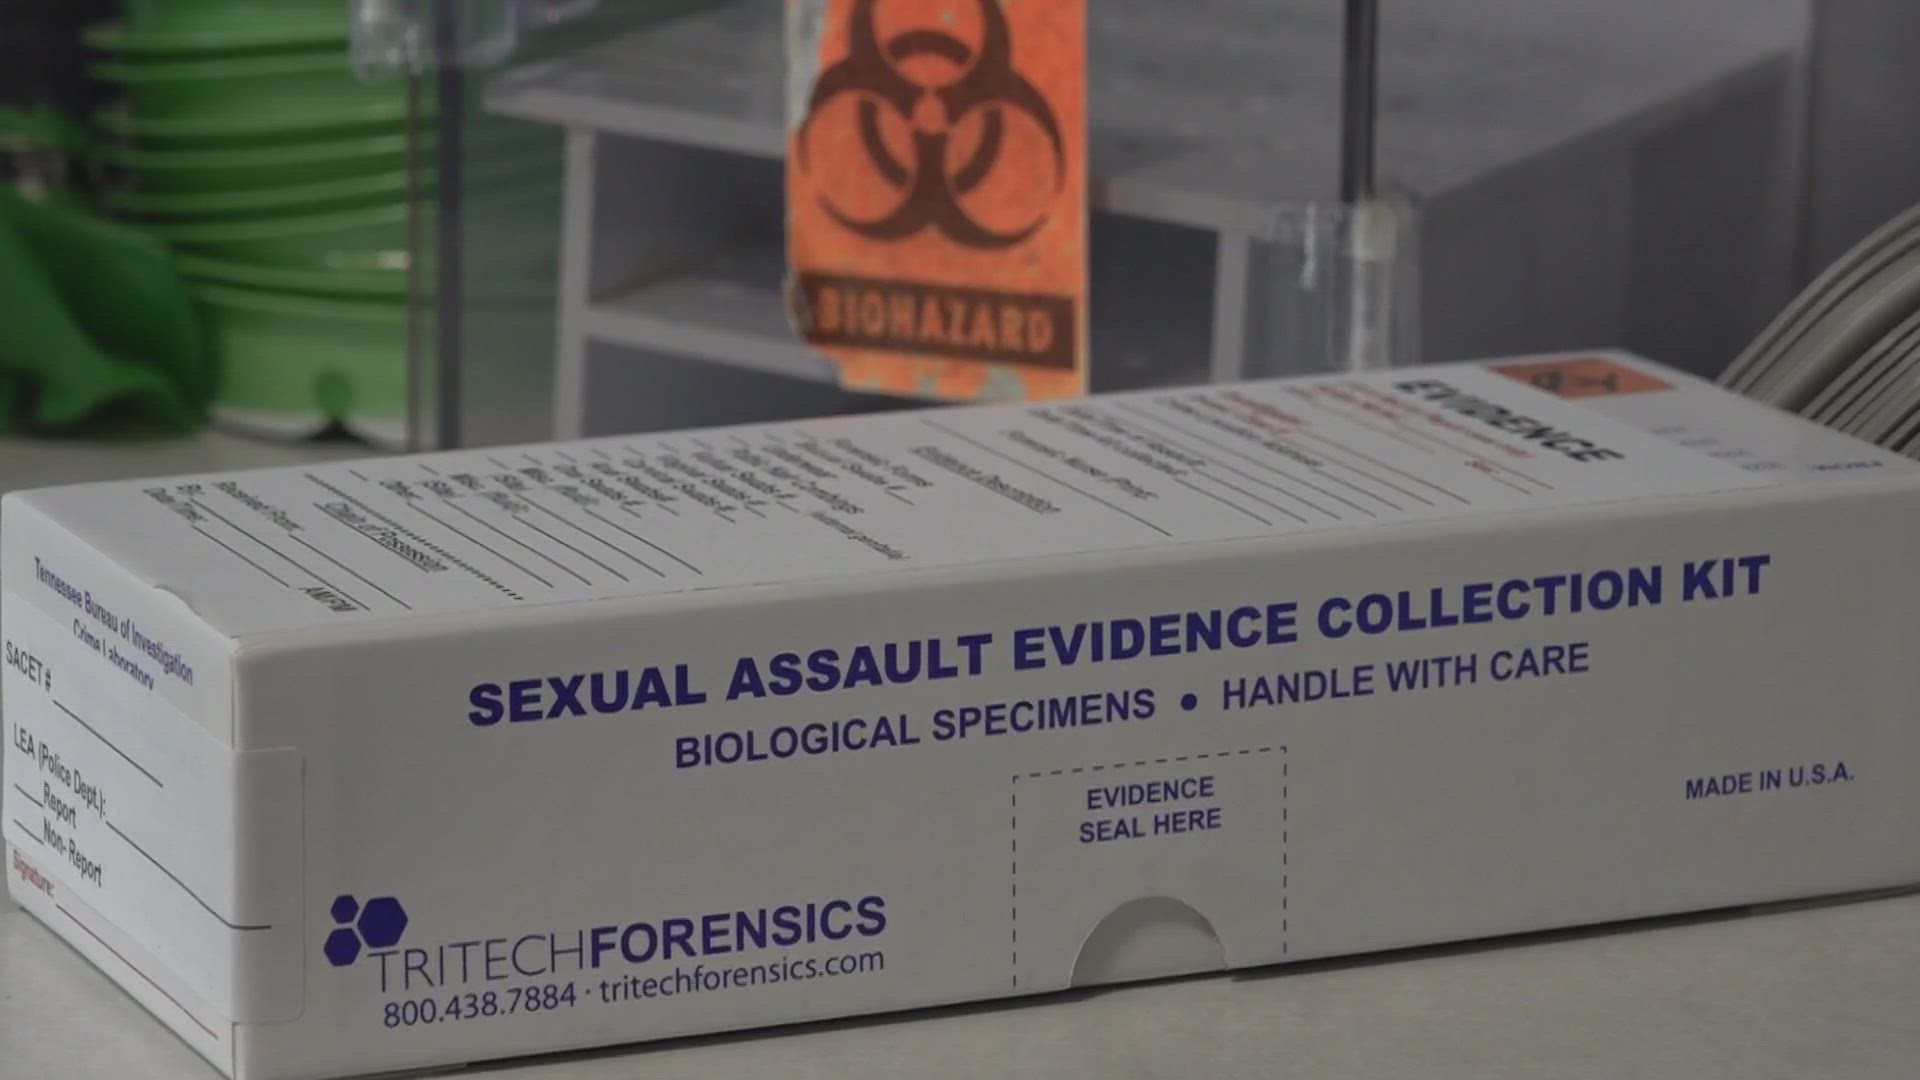 The bill, SB 0014, originally required TBI to analyze sexual assault evidence collection kits within 30 days before it was amended.